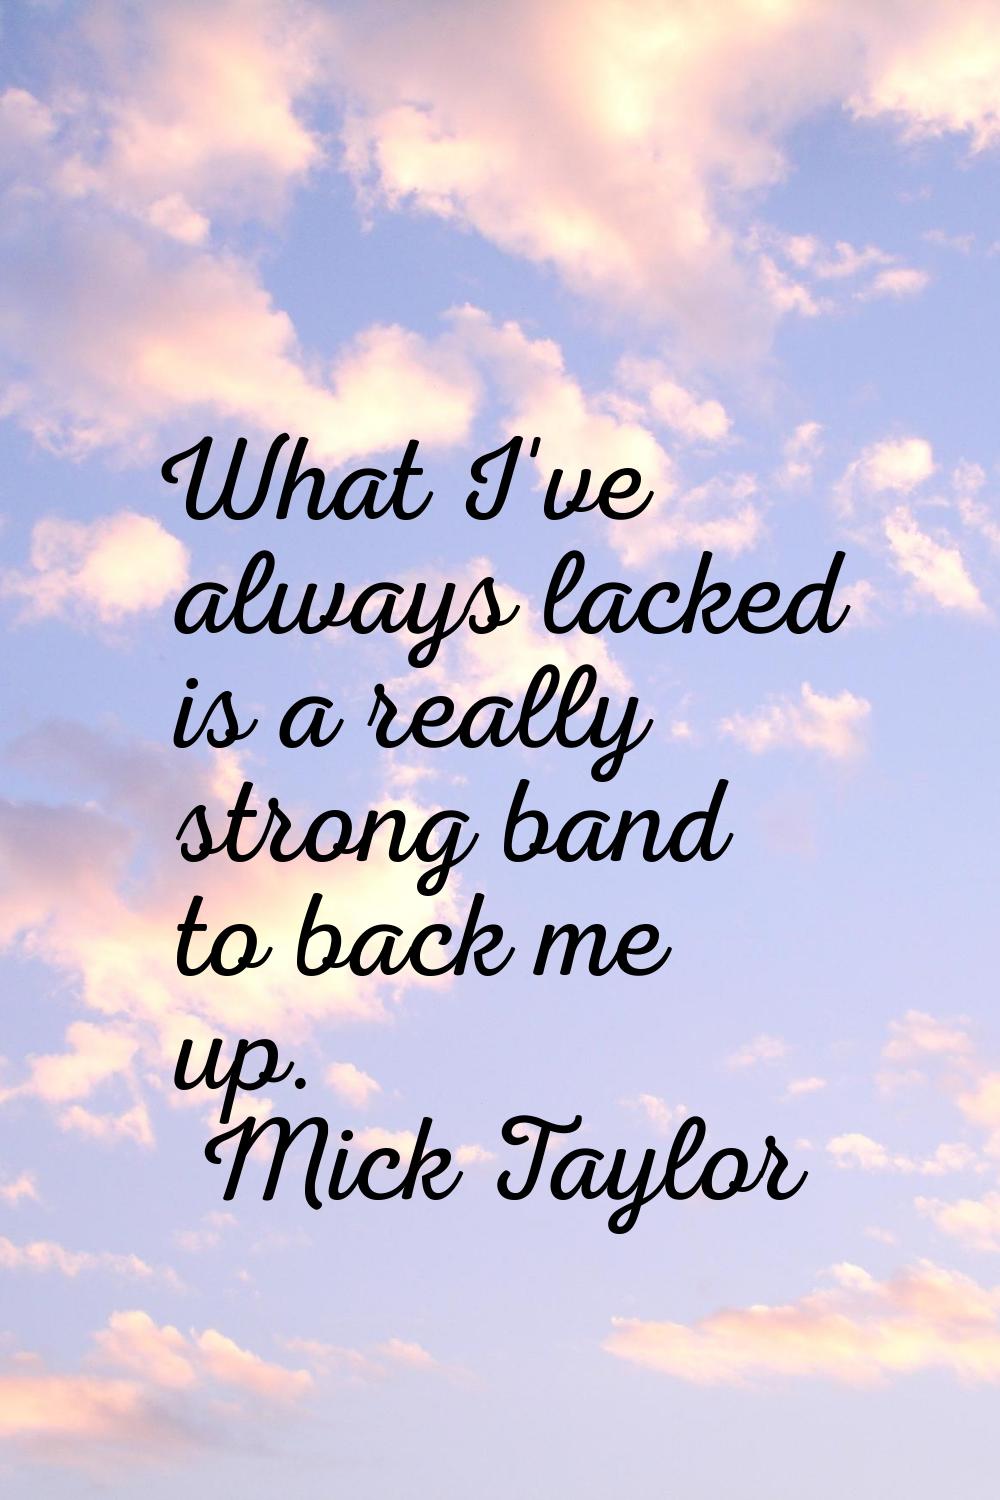 What I've always lacked is a really strong band to back me up.